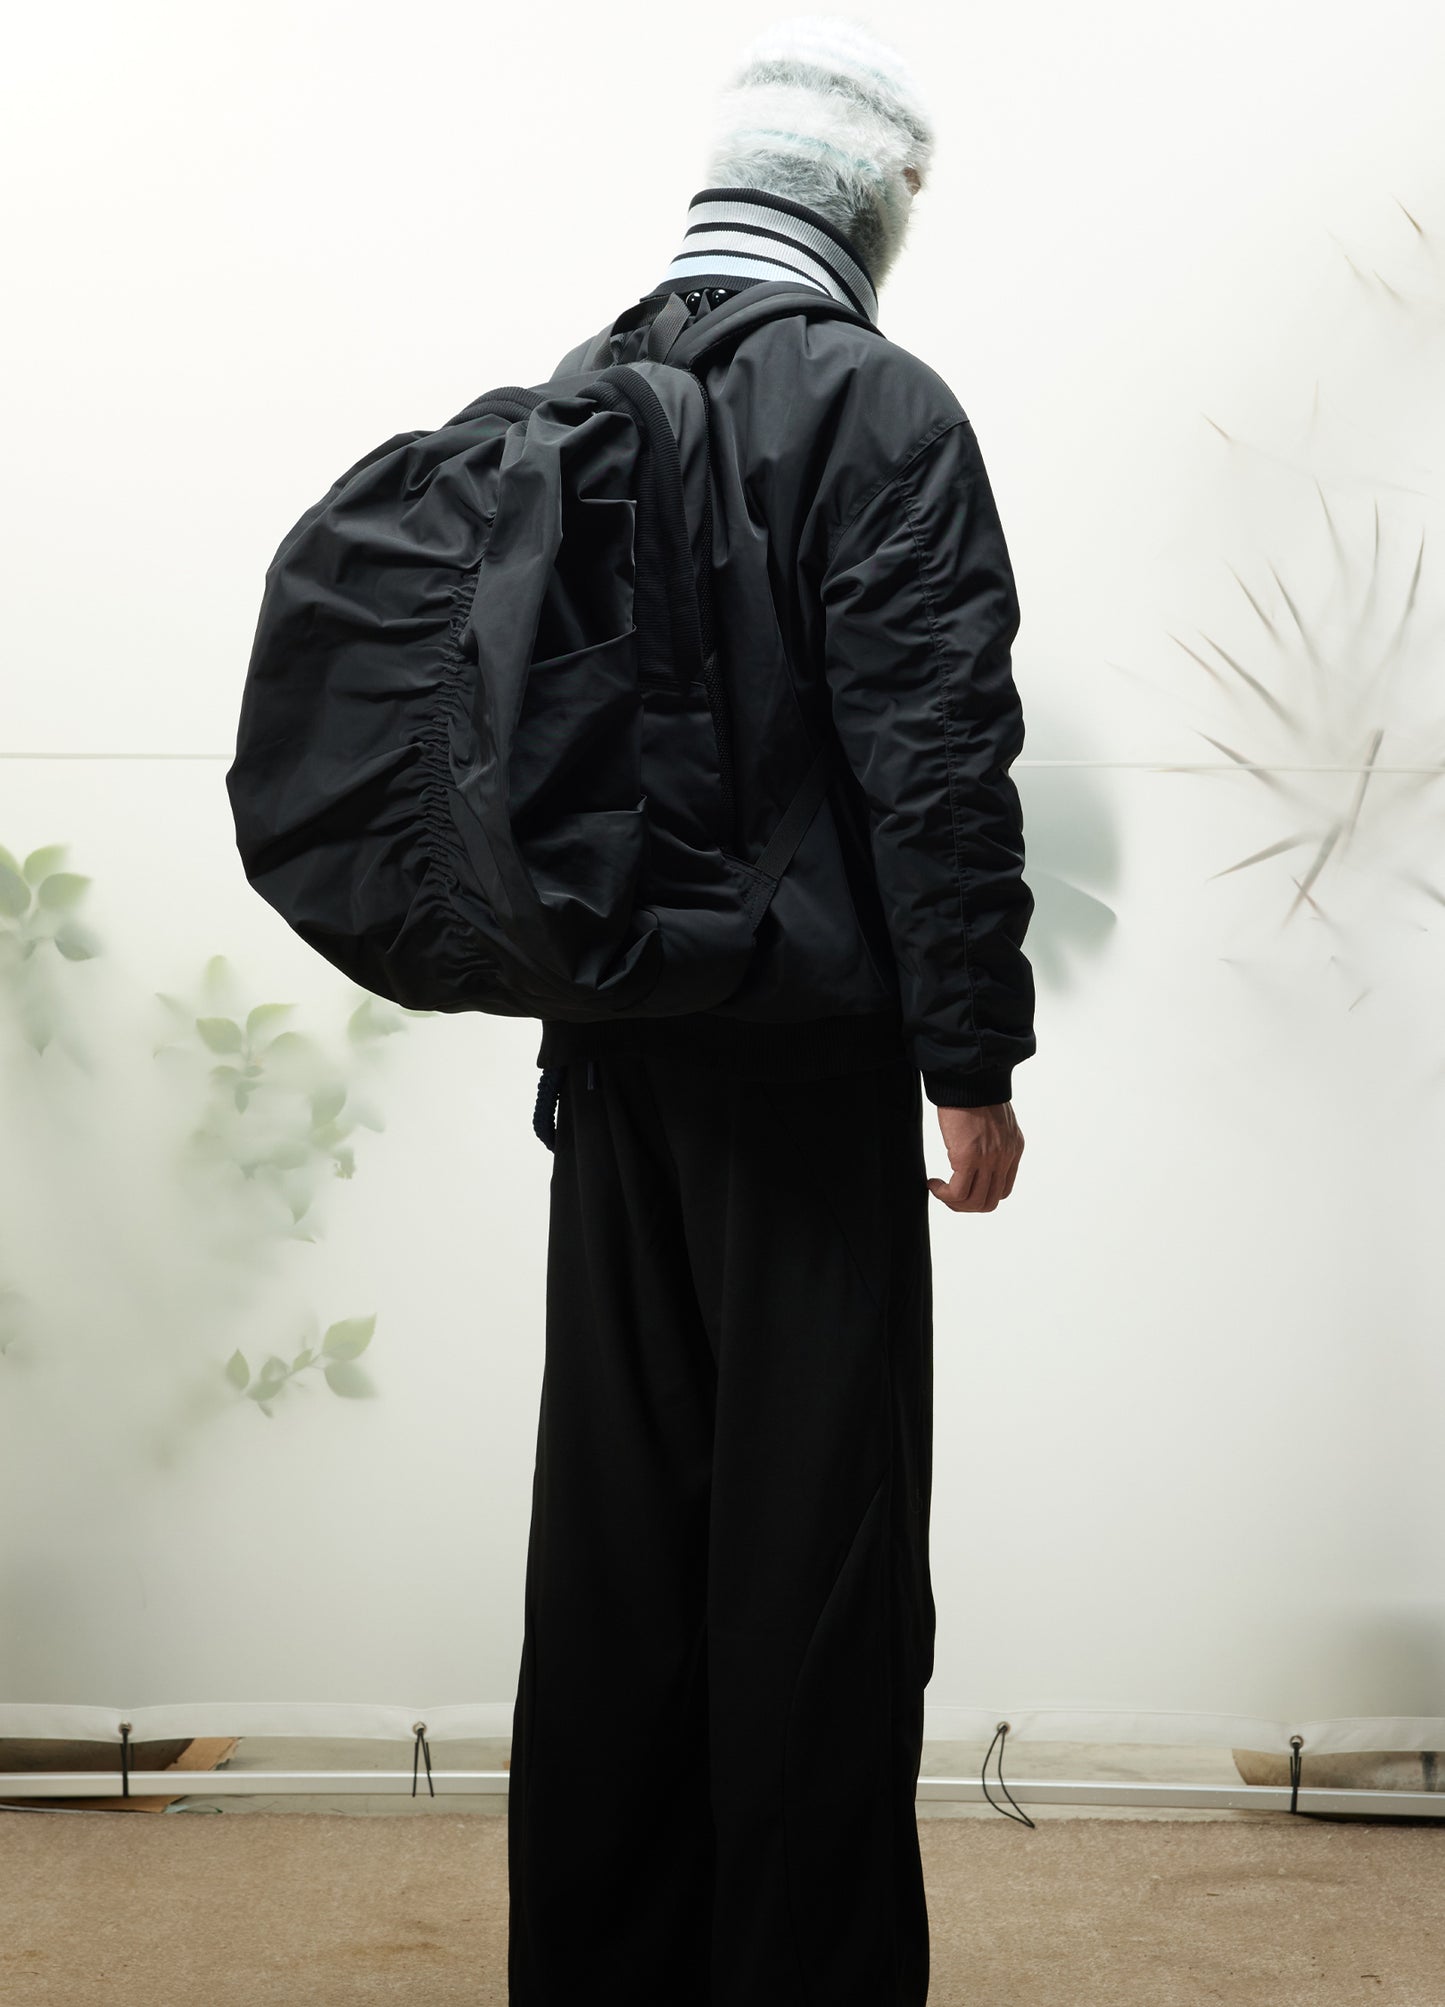 Pleated Backpack